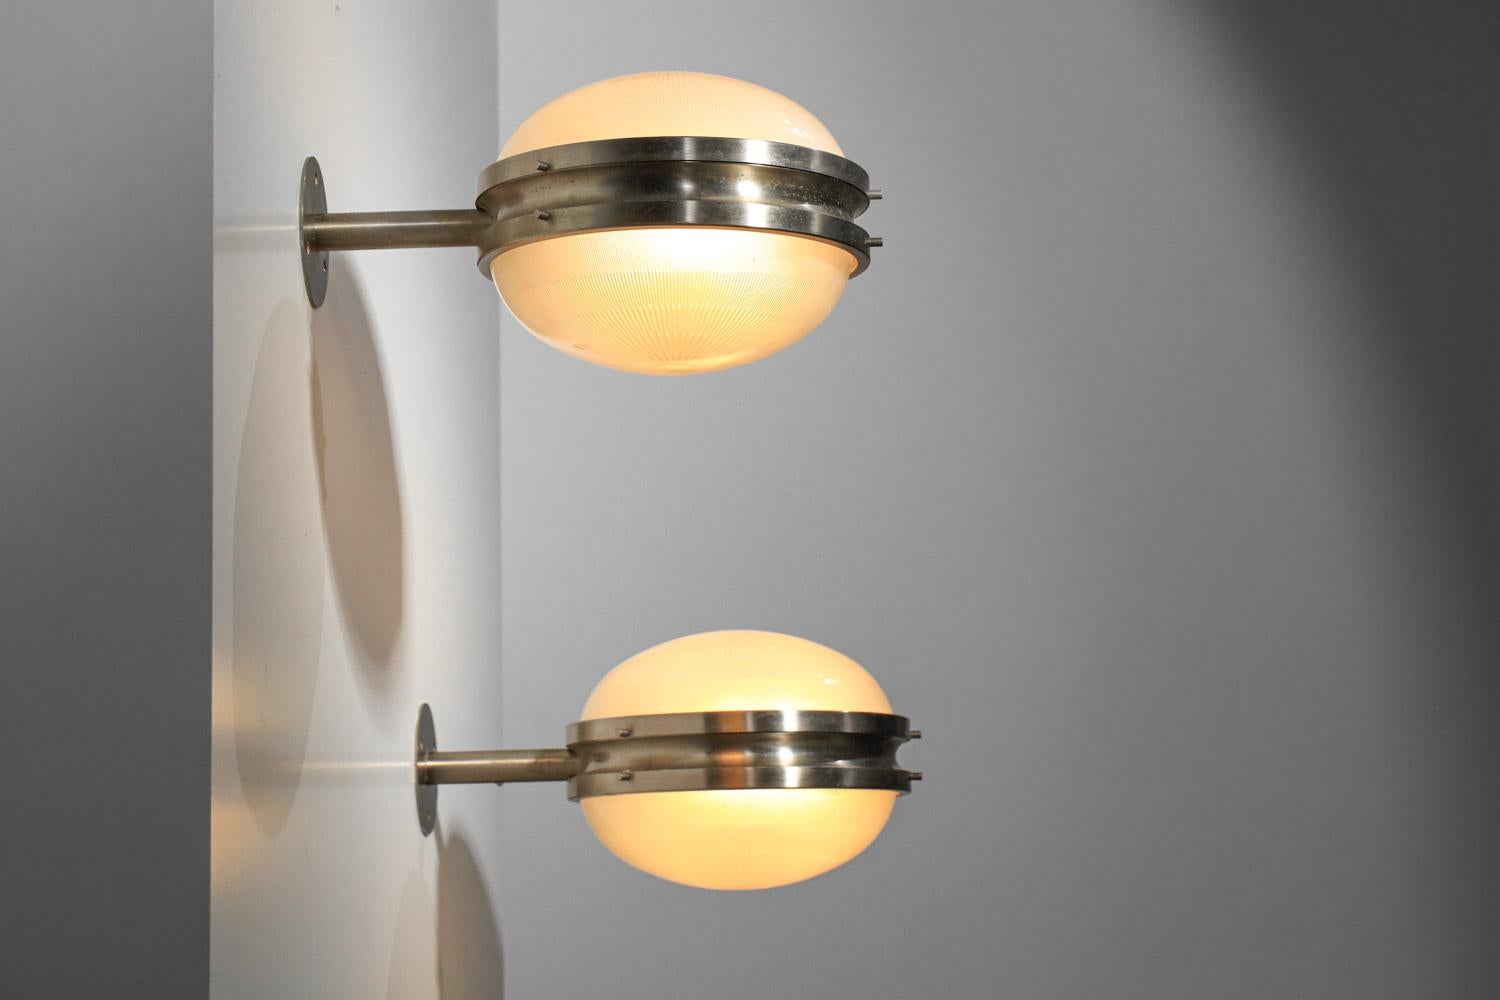 Large pair of 60's wall sconces by Italian designer Sergio Mazza for Artemide, 